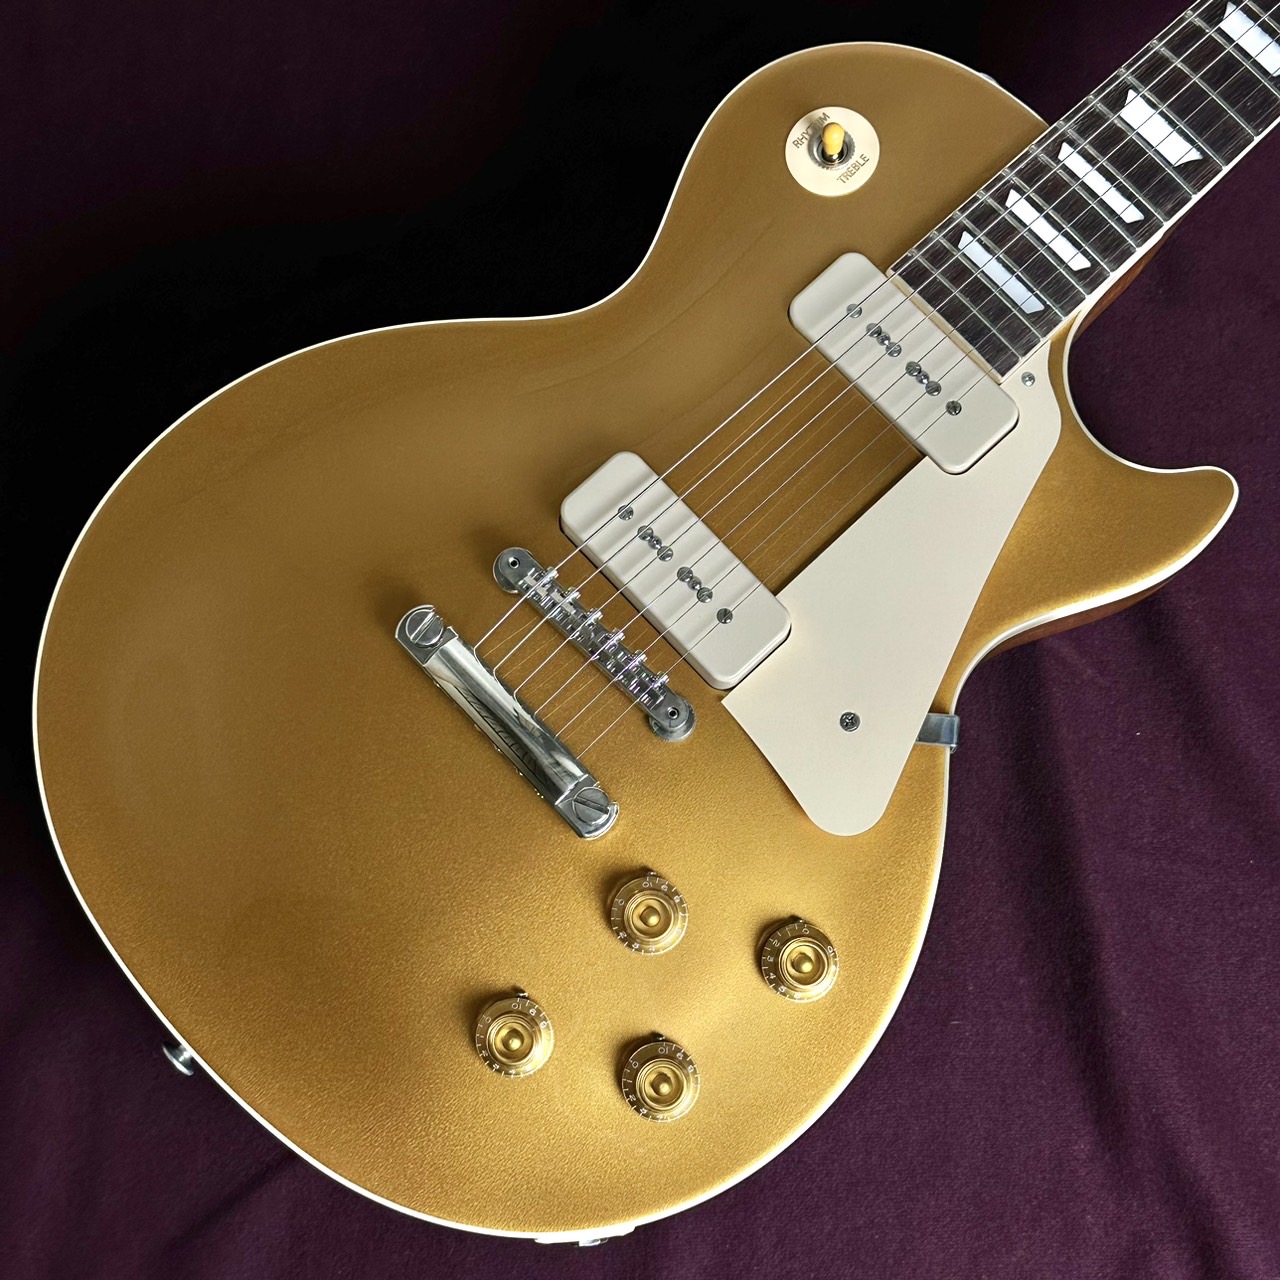 Gibson Les Paul Standard '50s P90 Gold Top レスポールスタンダード ギブソン 【 三宮オーパ店 】